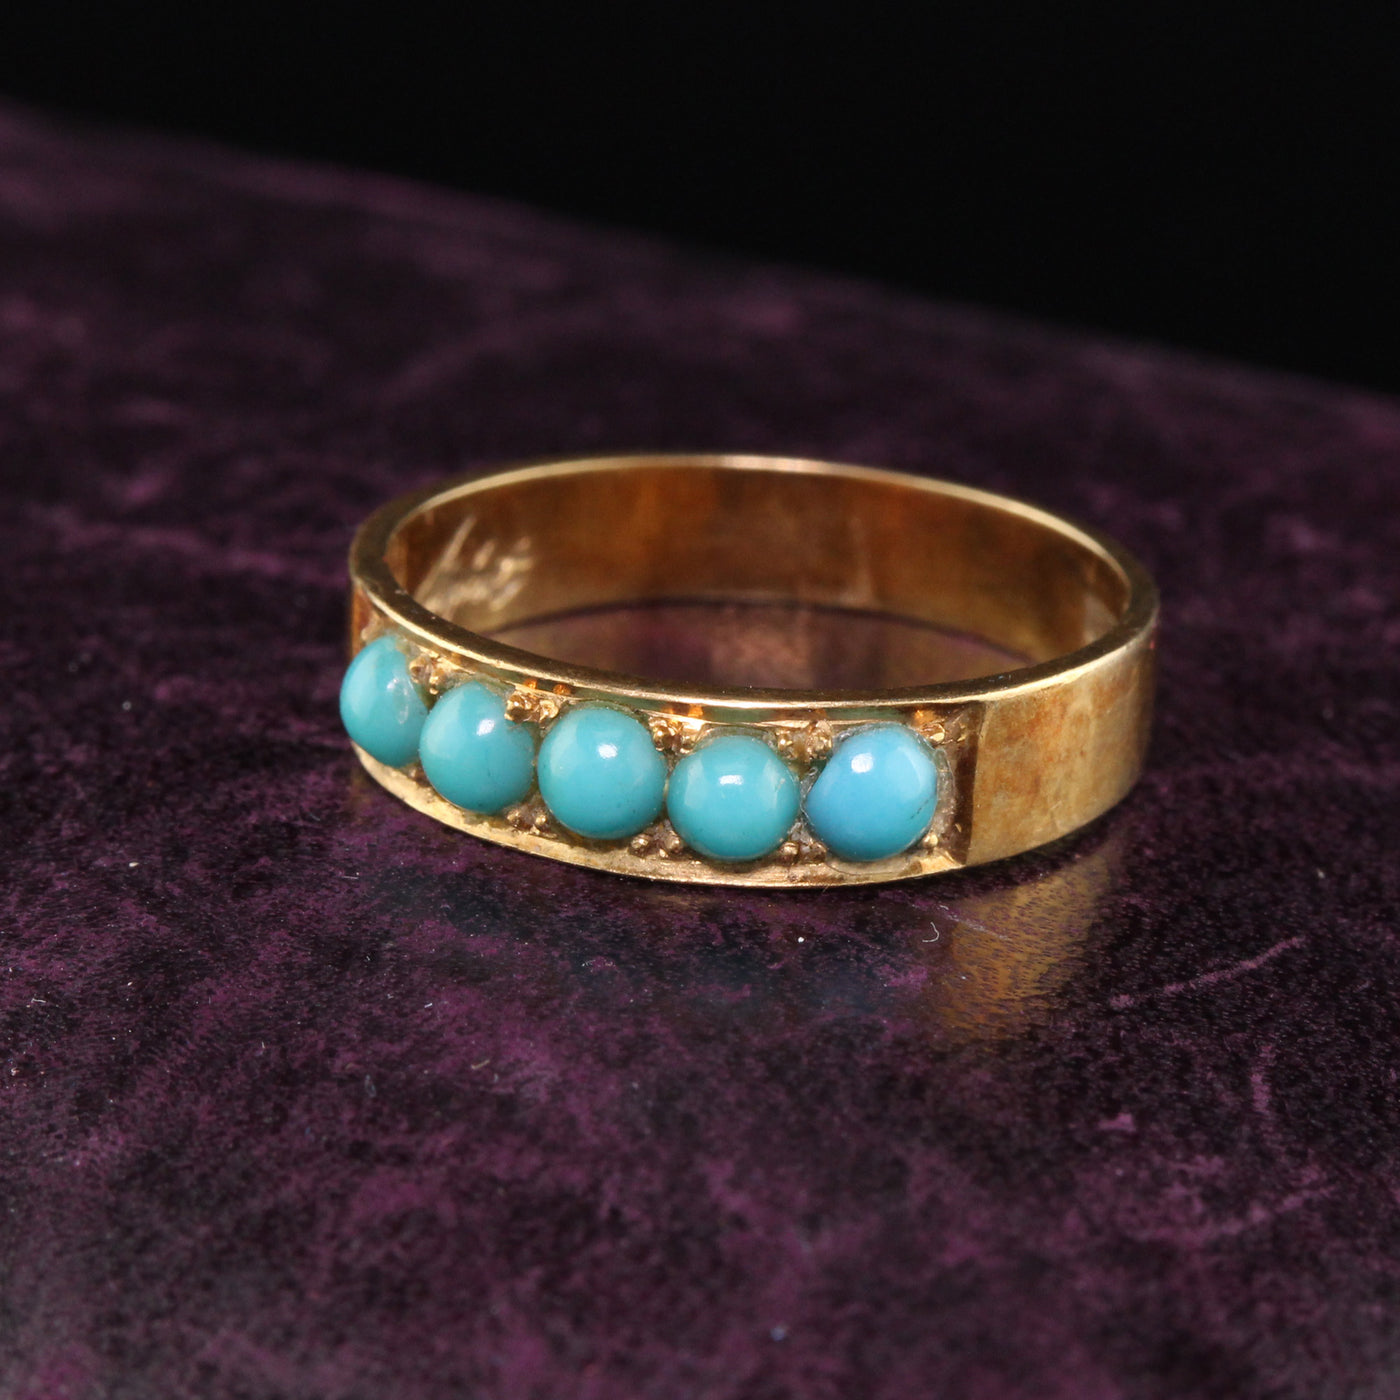 Circa 1968 - Vintage Estate 18K Yellow Gold Turquoise Stacking Band - The Antique Parlour